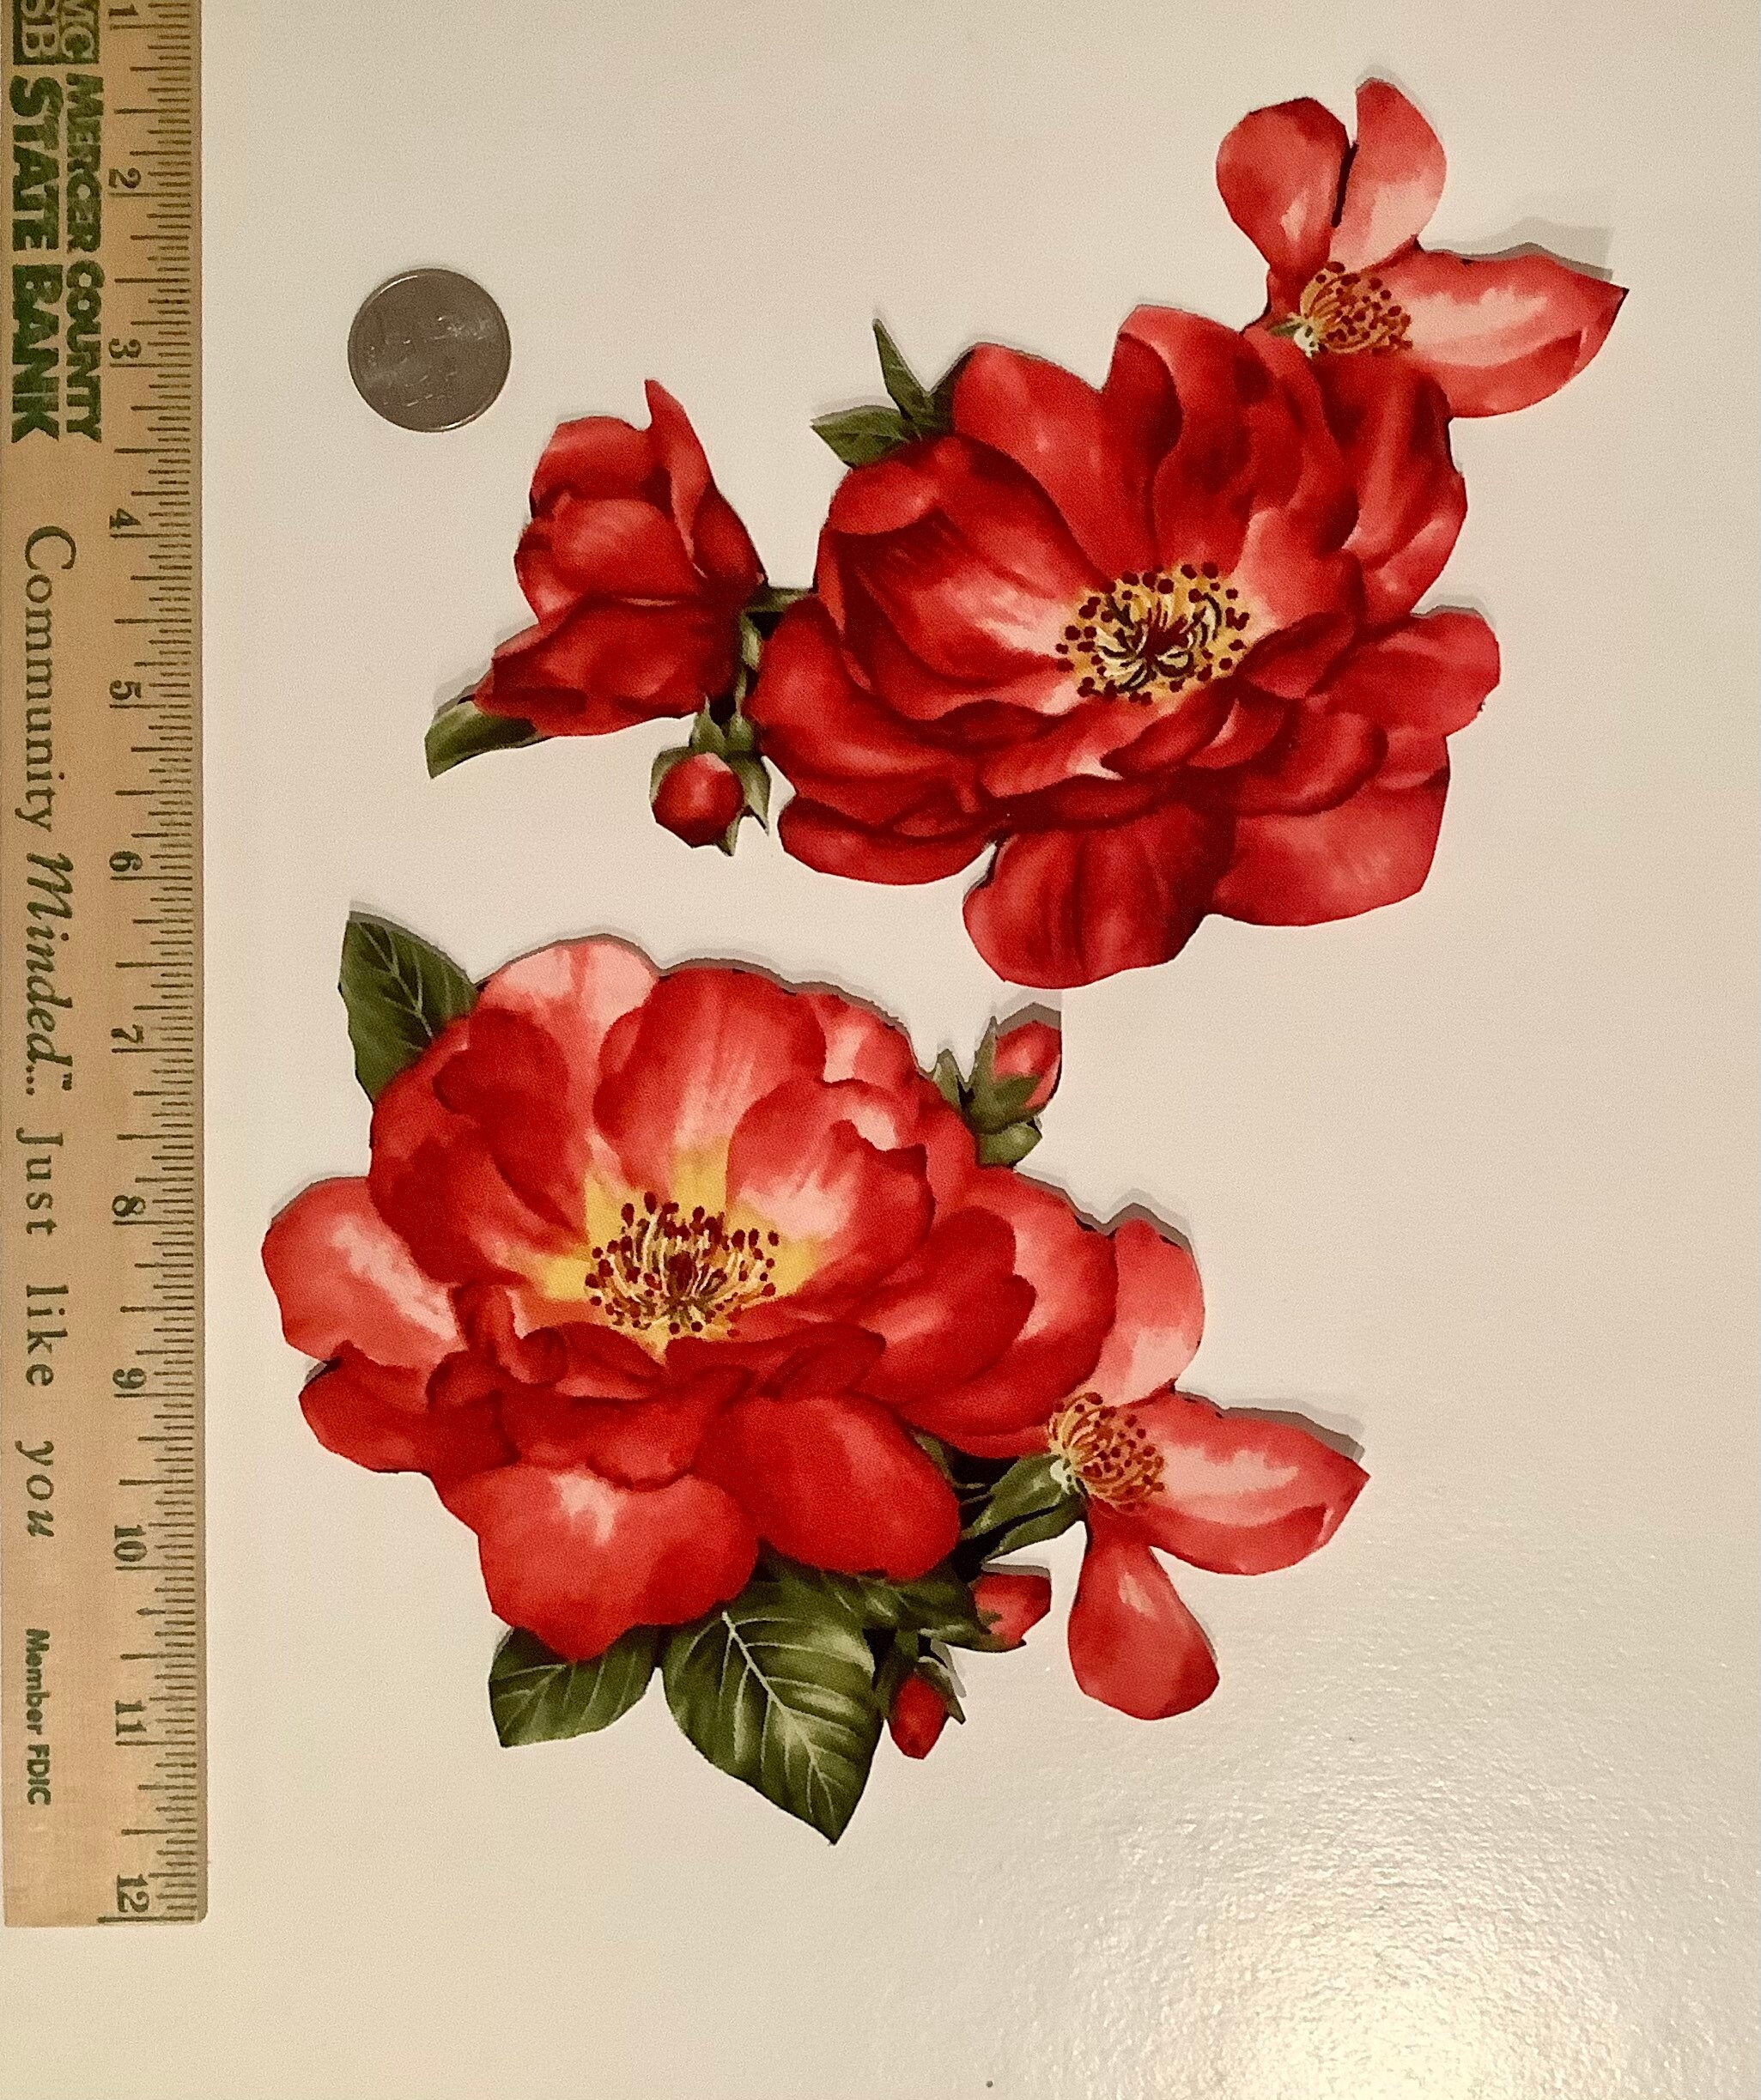 2 Magnolia Flower Patches, Sew on Patch Pink Rose Flowers, Fabric  Appliques, Embroidery Craft Supplies 